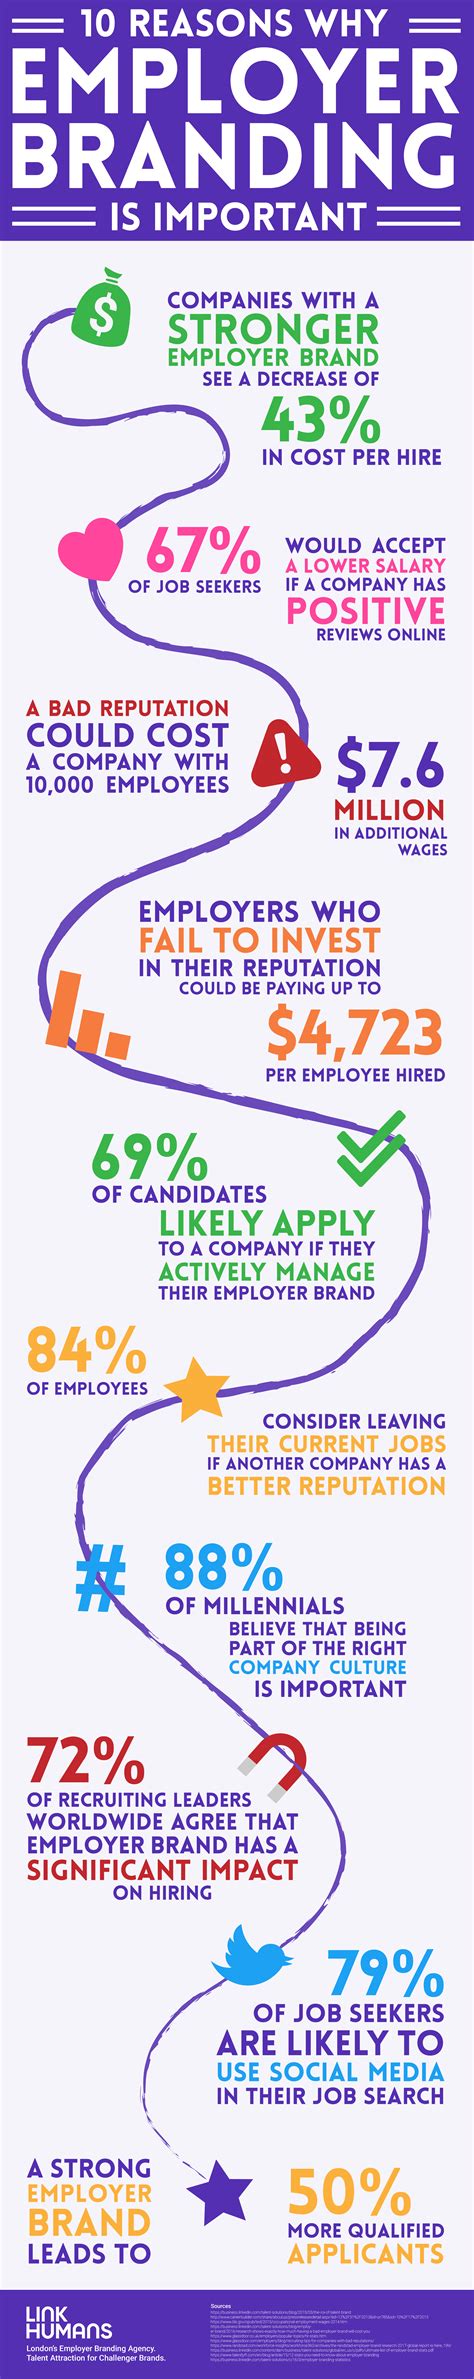 Reasons Why Employer Branding Is Important